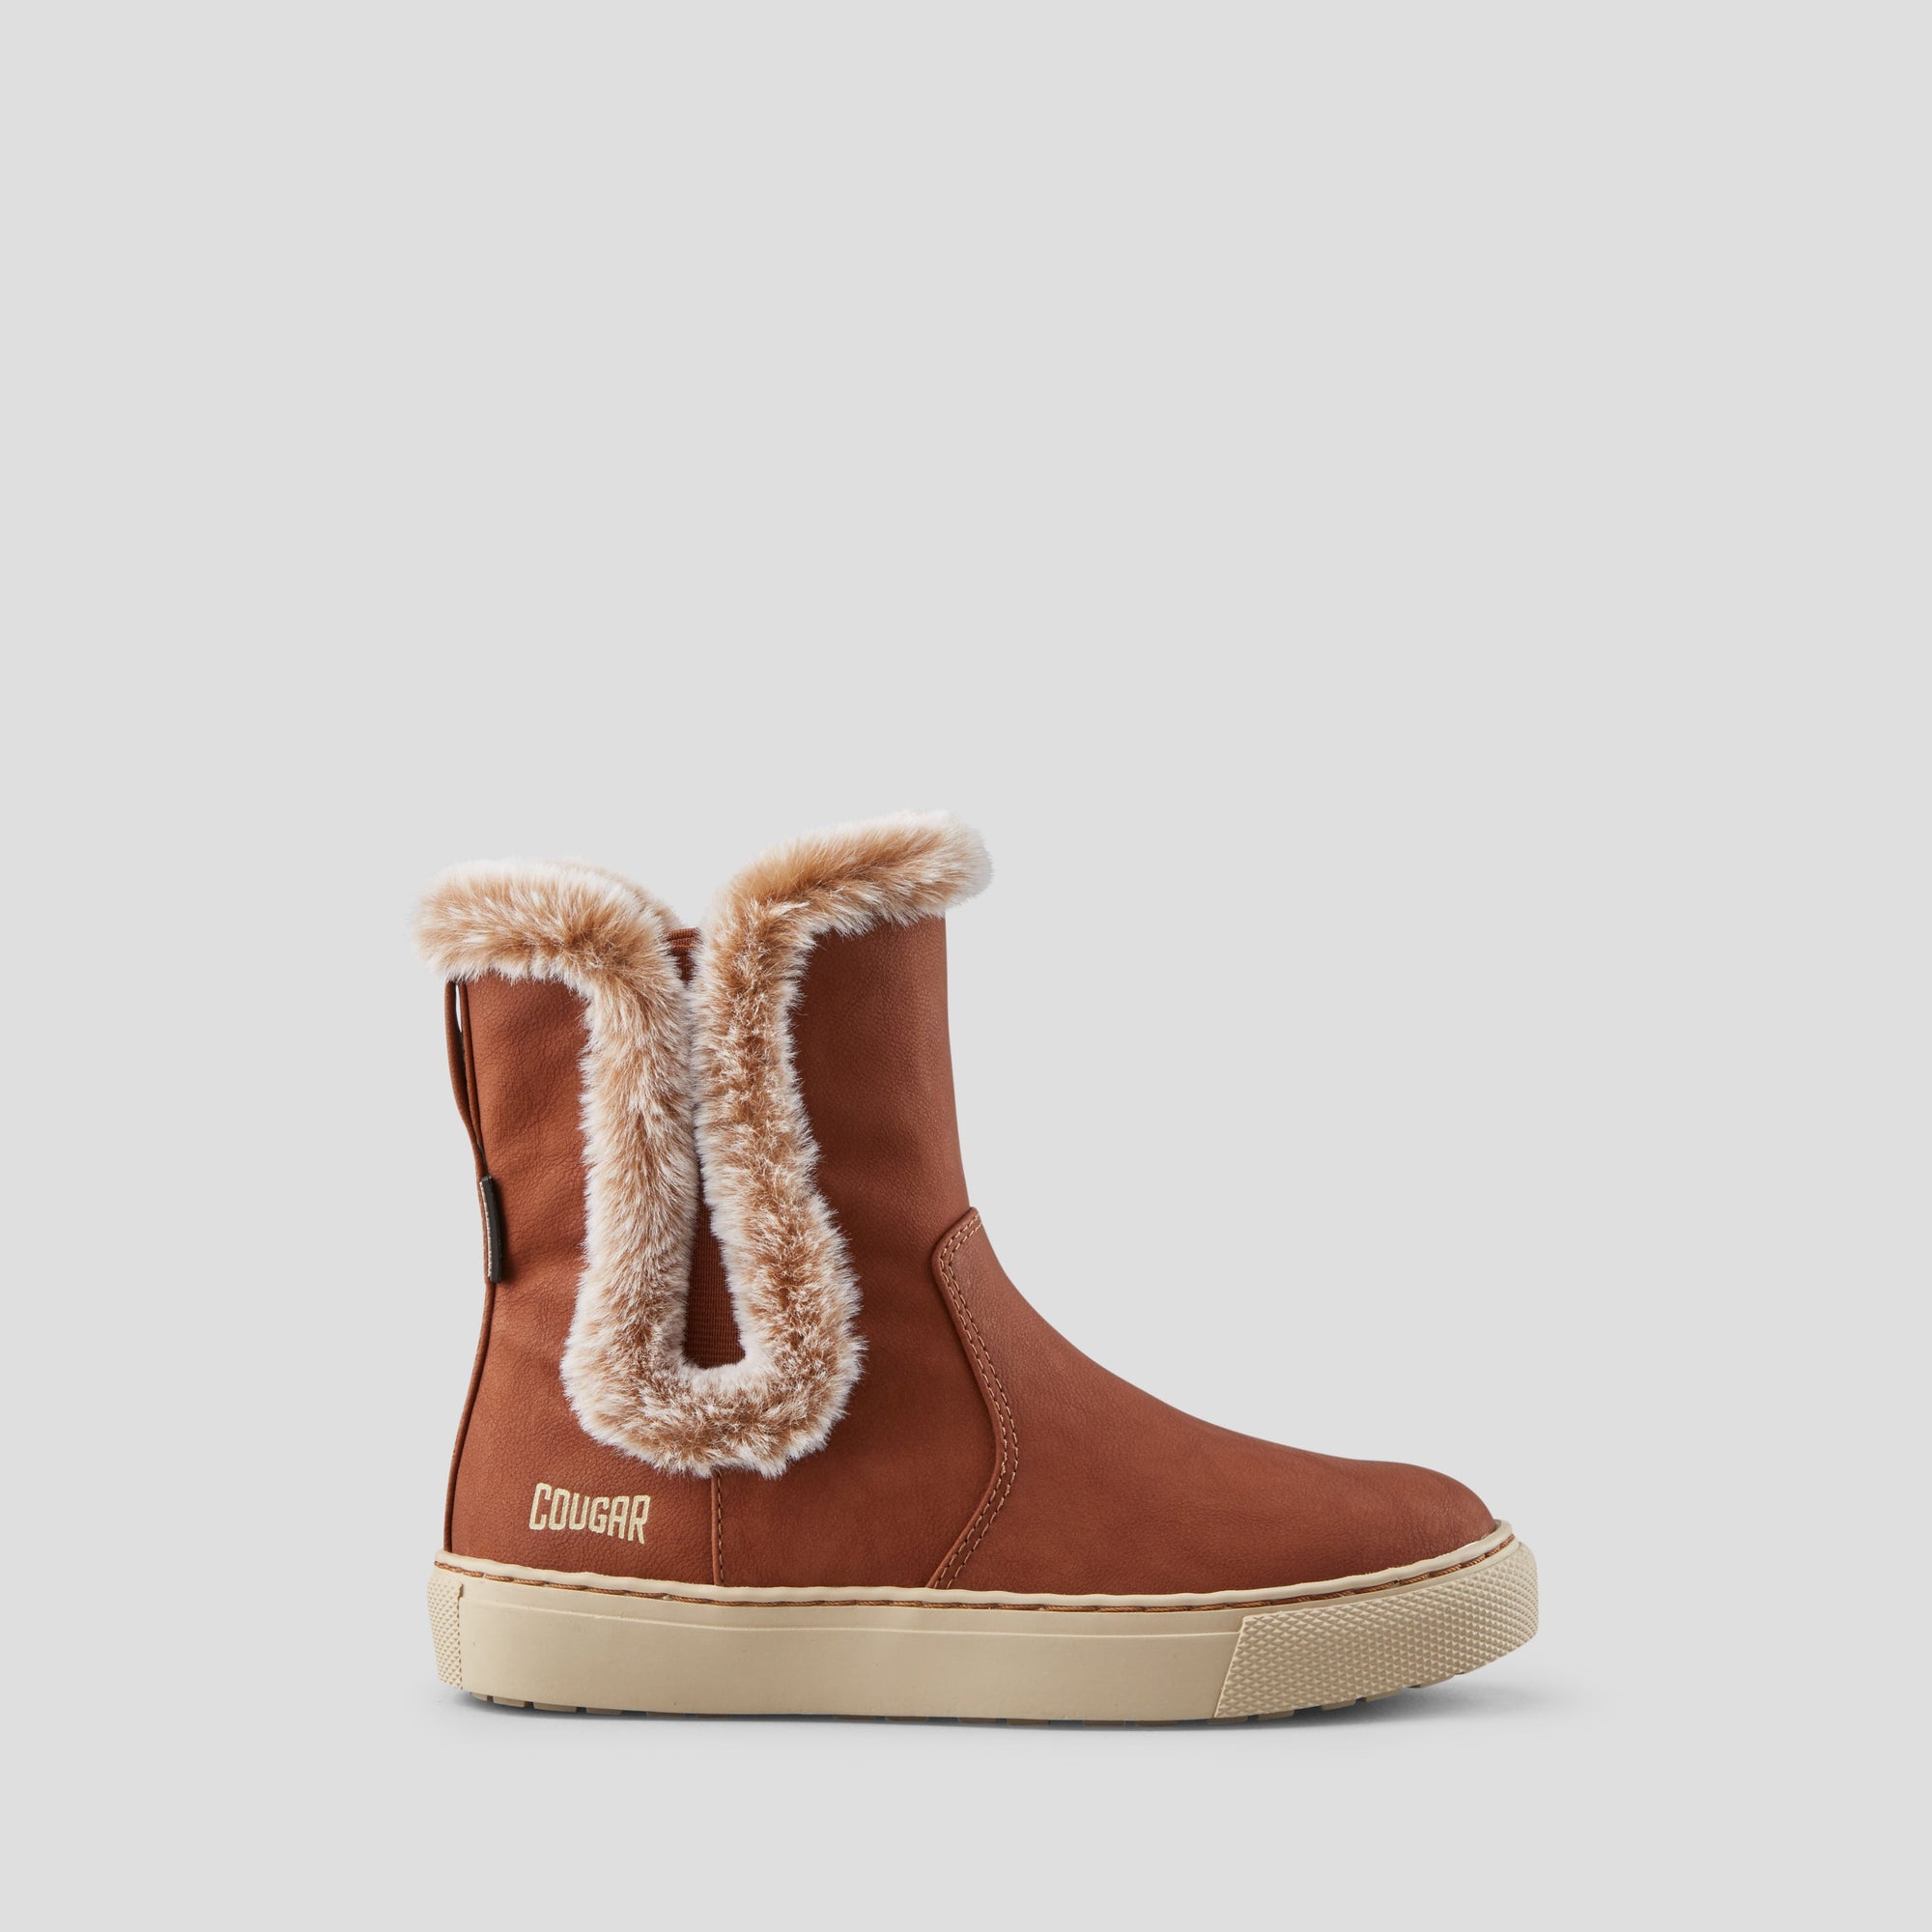 Ditto Chelsea Waterproof Winter Boot (Youth) - Colour Tan